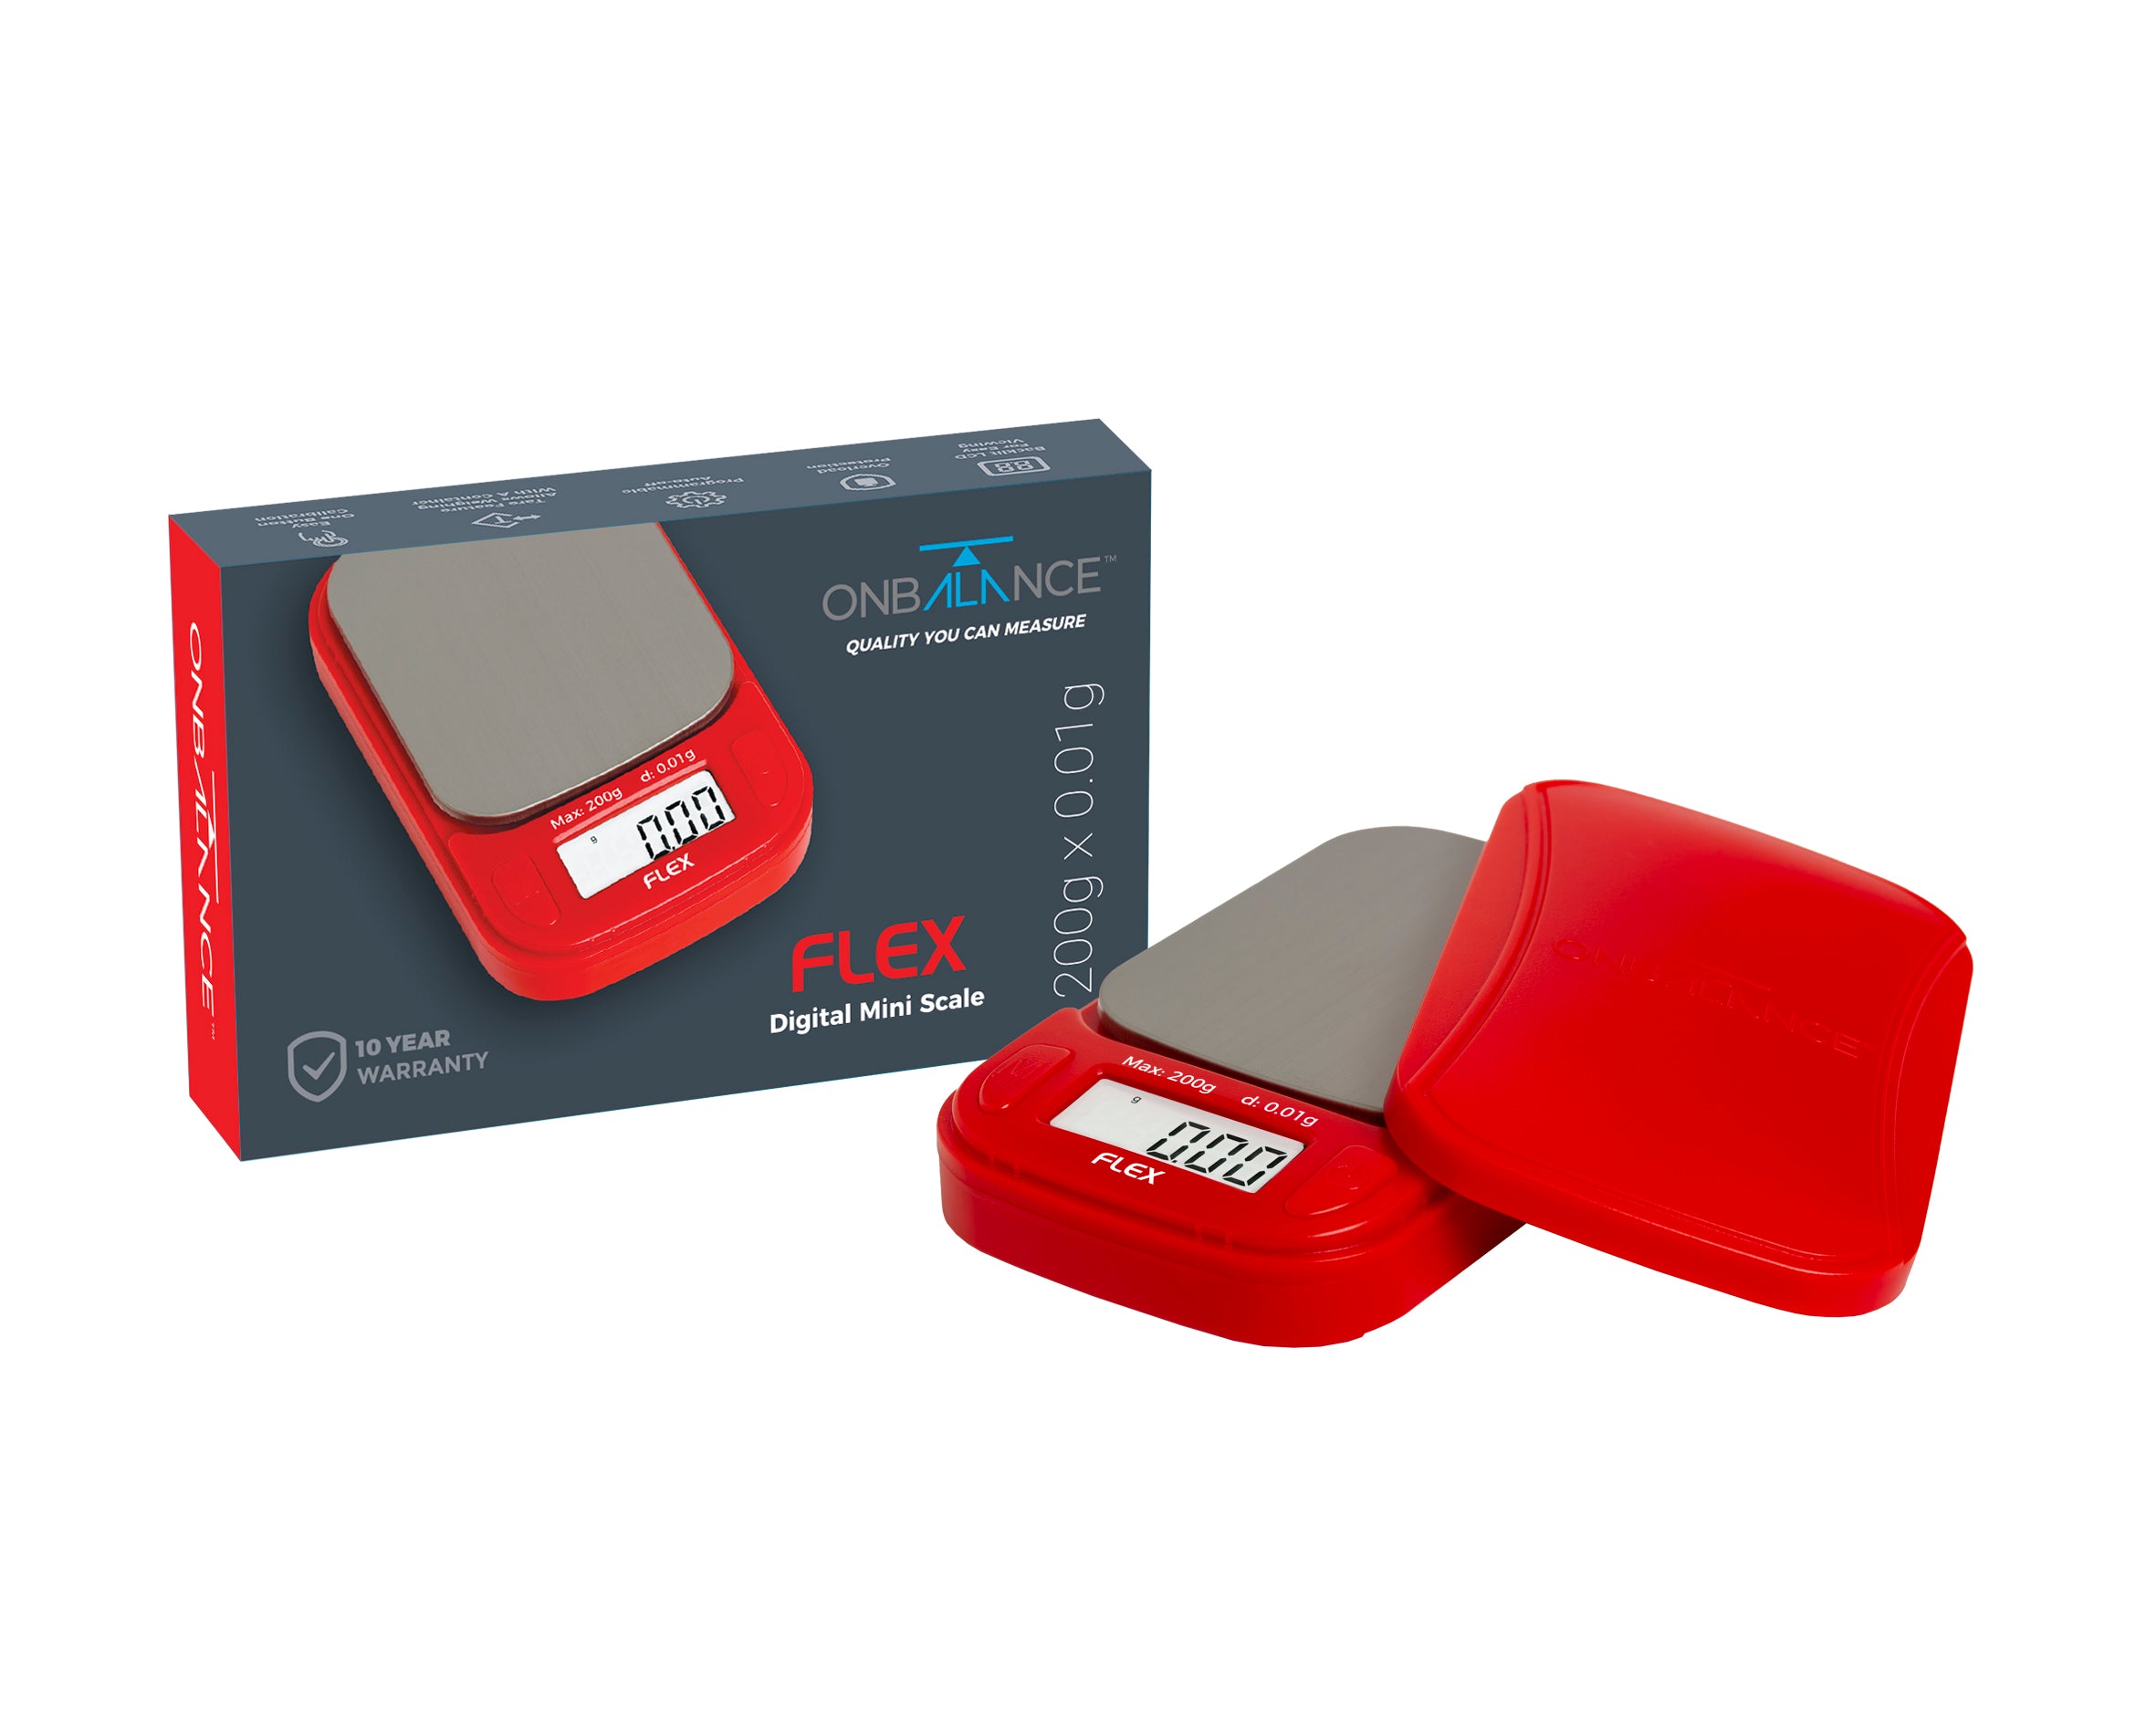 Omega Scales 200, KITCHEN SCALES, digital scales, pocket scales